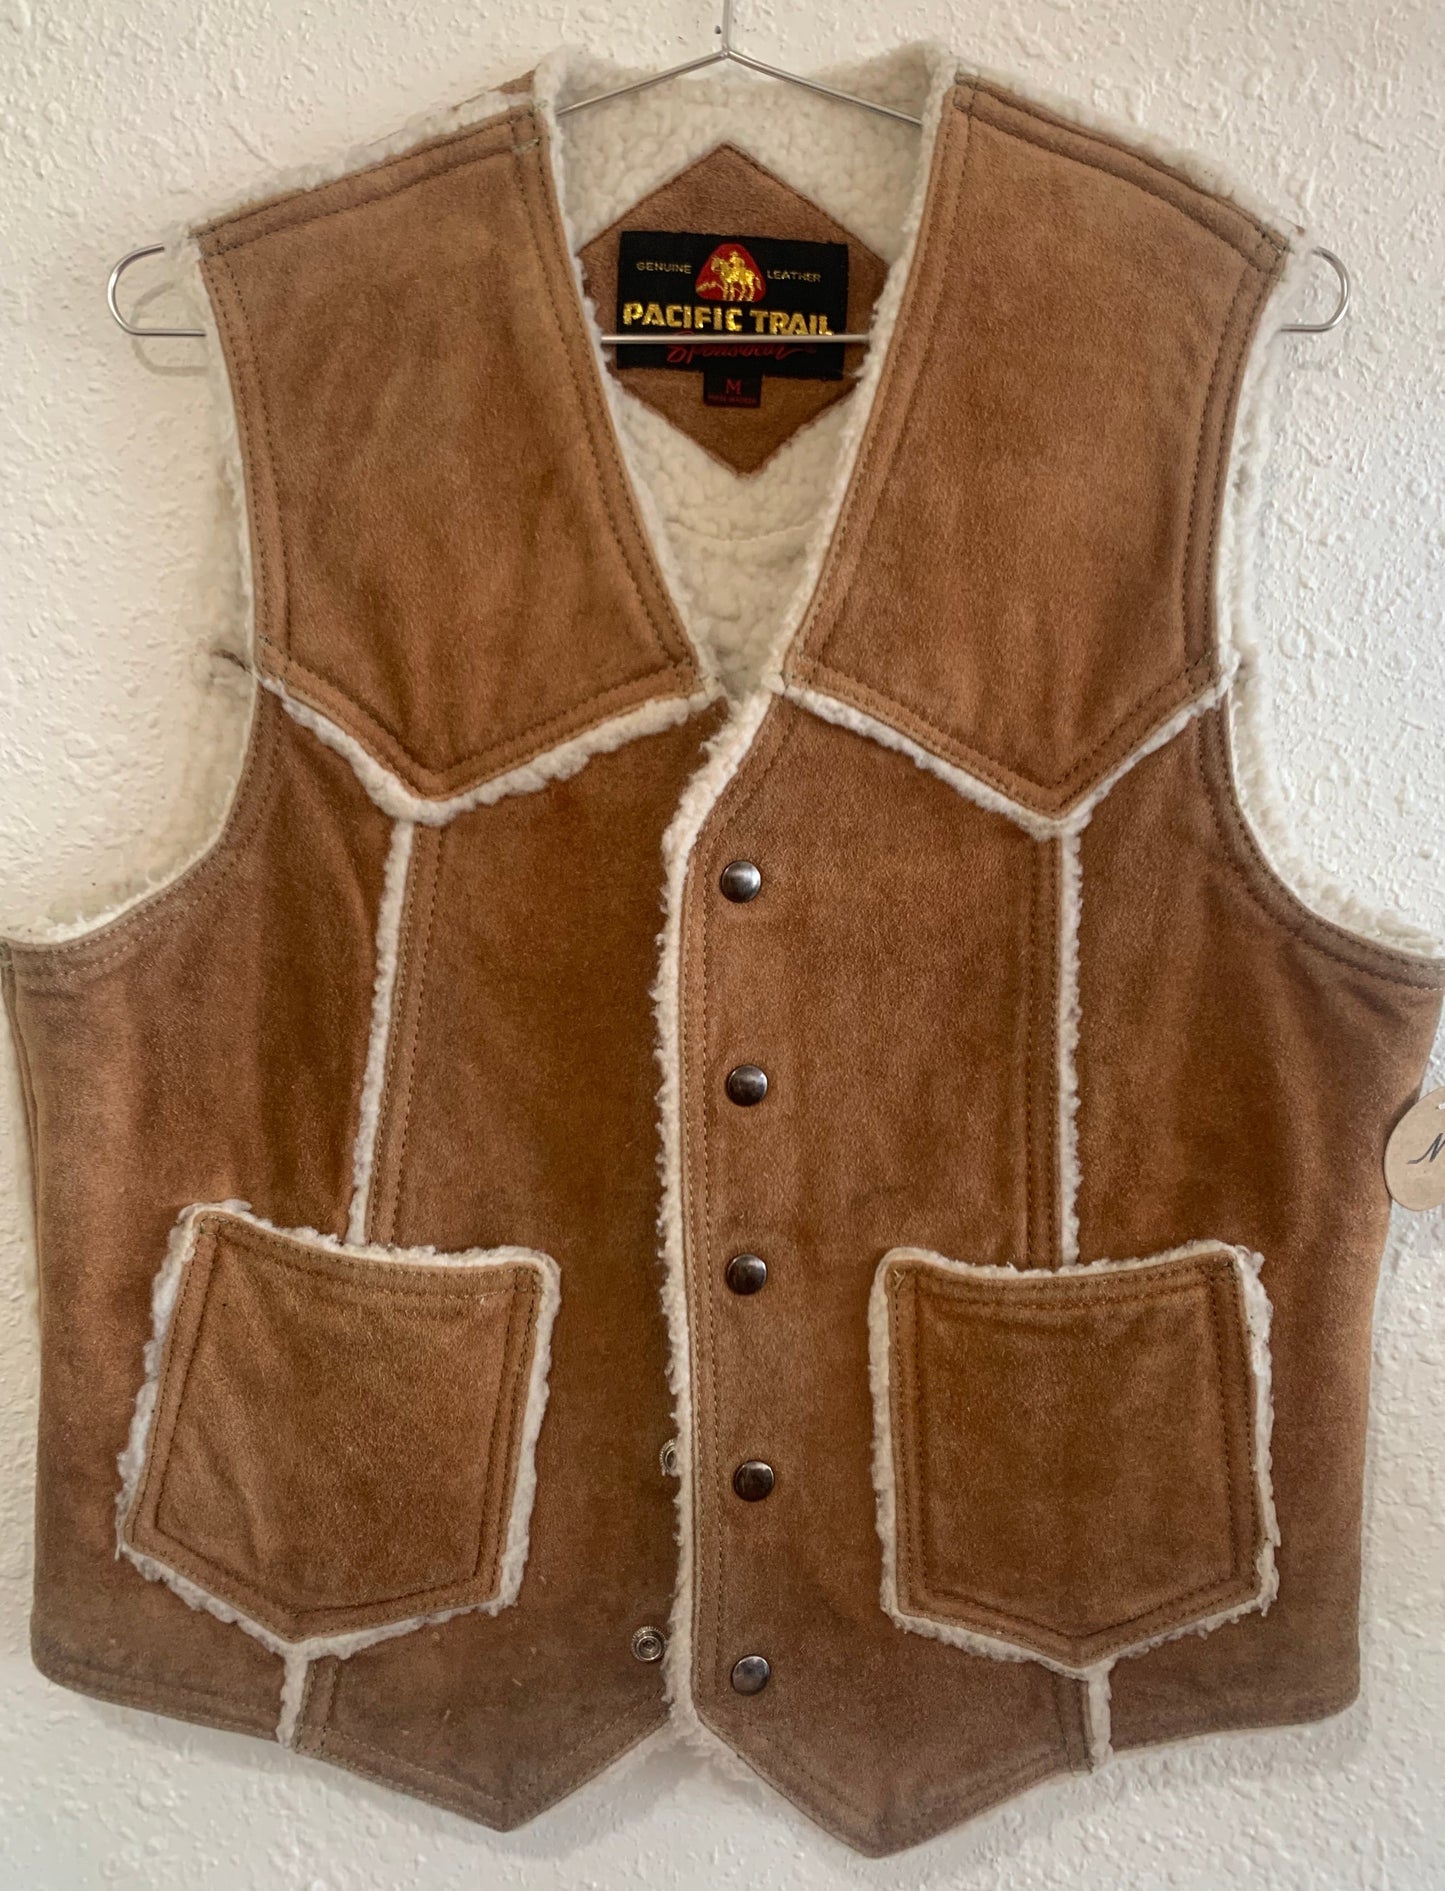 Pacific Trails Suede Sherpa Lined Vest